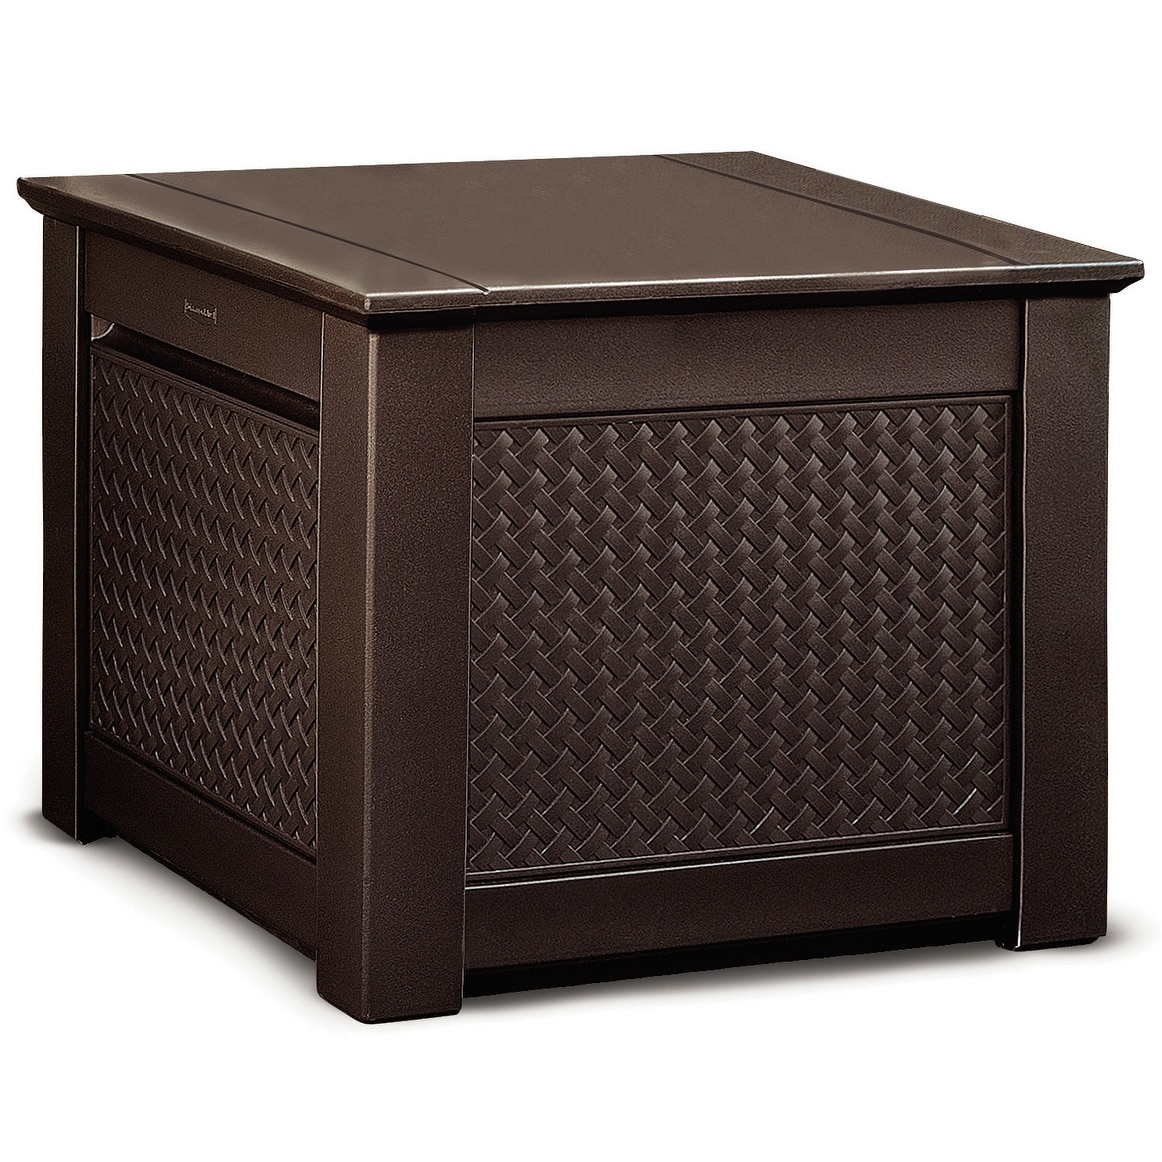 Rubbermaid 1837303 Patio Chic 29 Wide Resin Outdoor Storage Box